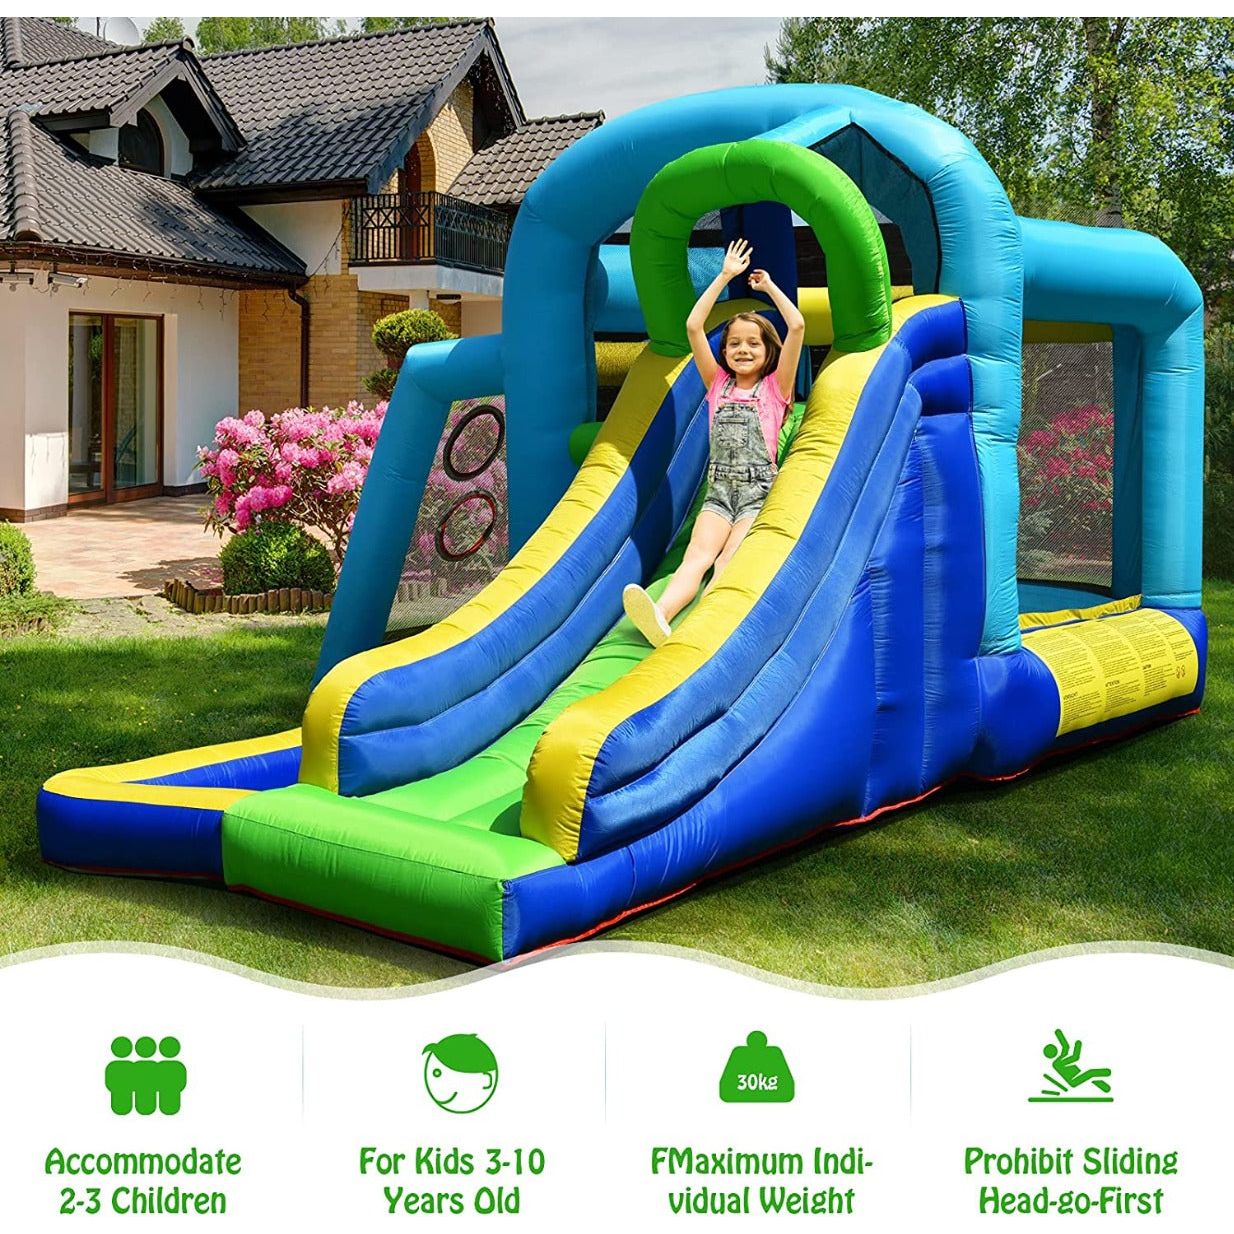 Inflatable Bouncy Castle With Splash Pool, Slide and Ball Pit